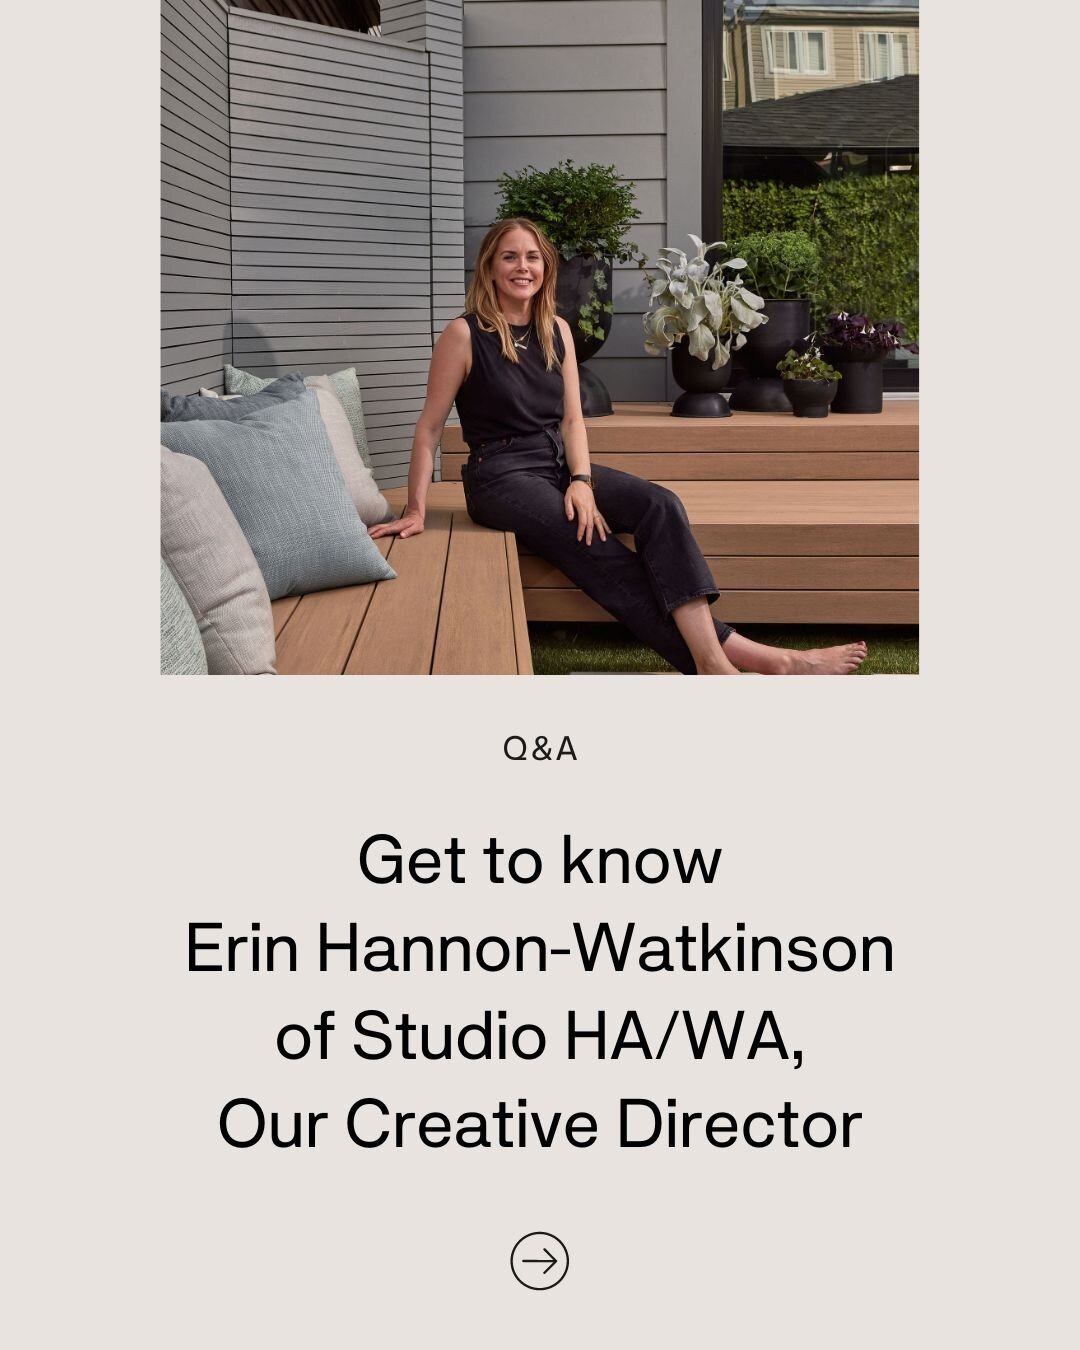 Get to know our Founder and Creative Director. ⁠
⁠
A more personal look into how she got into interior design, education, the road to starting HA/WA and design approach. ⁠
⁠
Scroll to learn more and comment below with any burning questions for Part 2